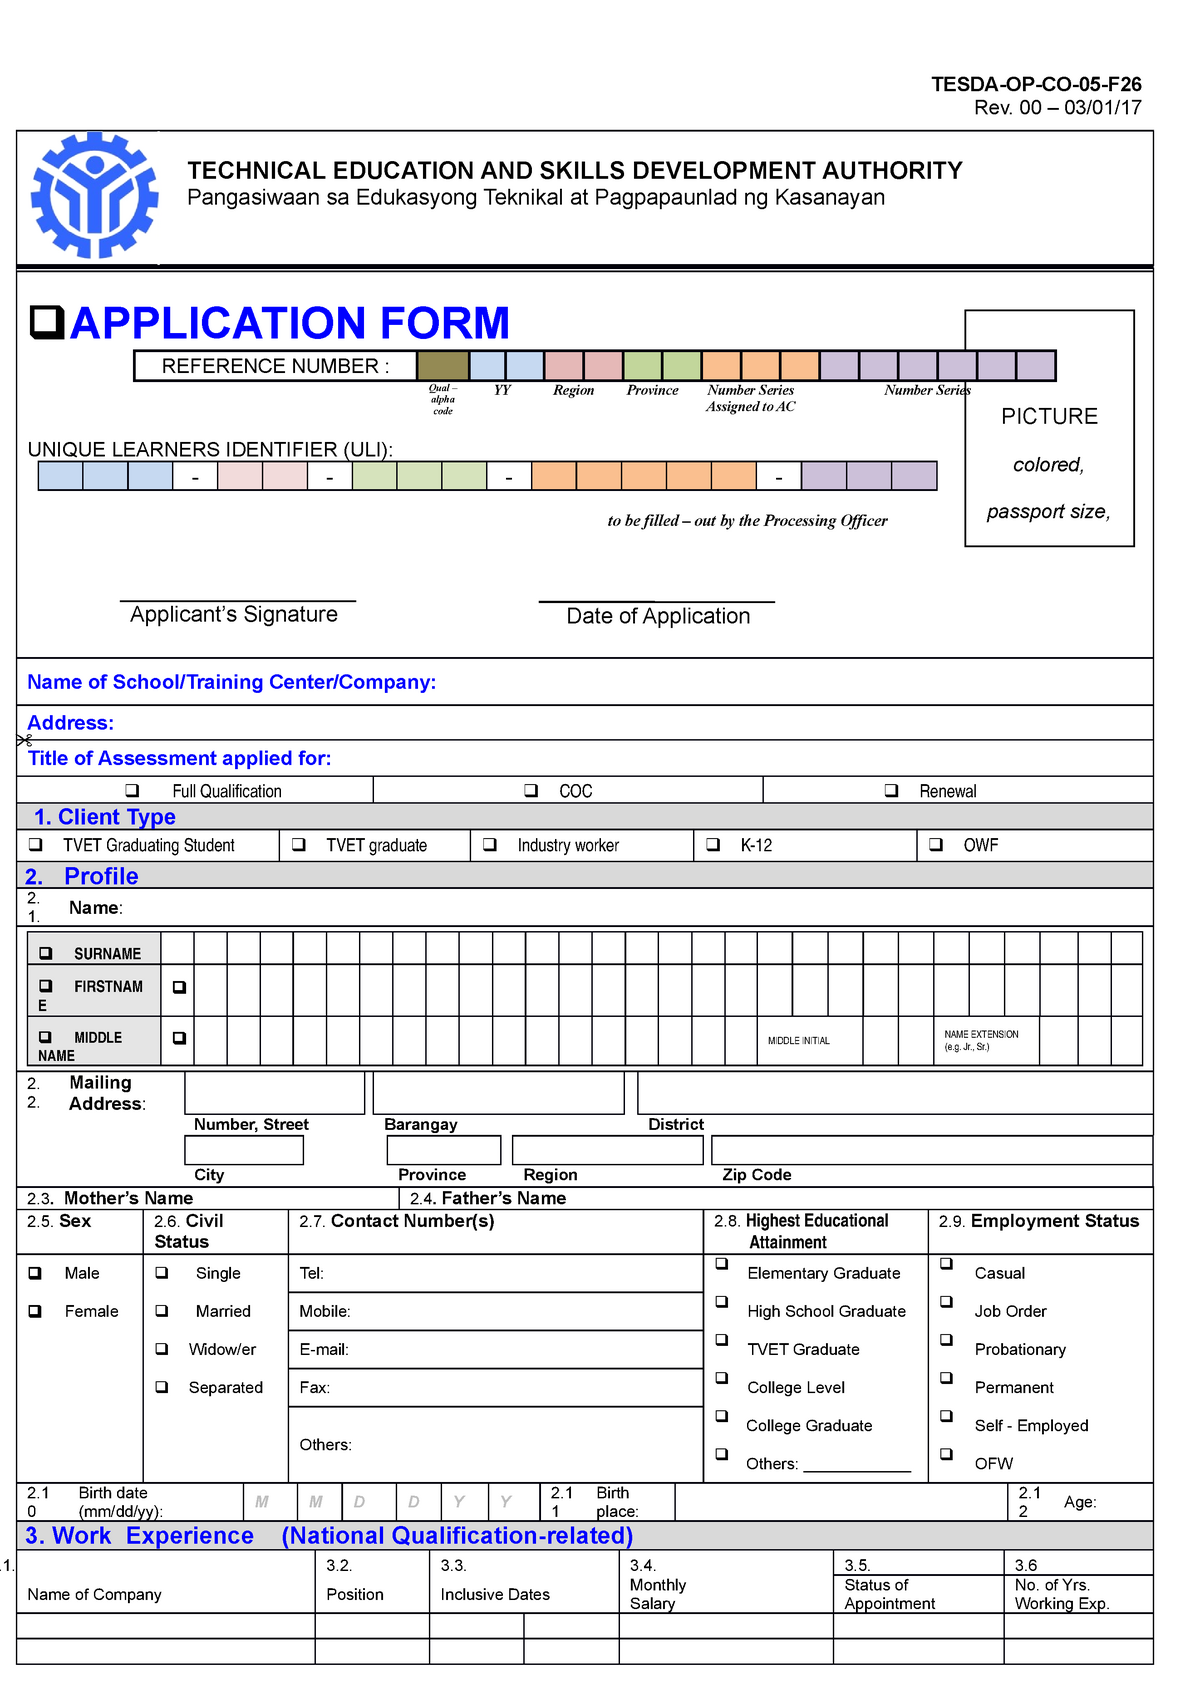 tesda-op-co-05-competency-assessment-forms-rev-00-03-01-technical